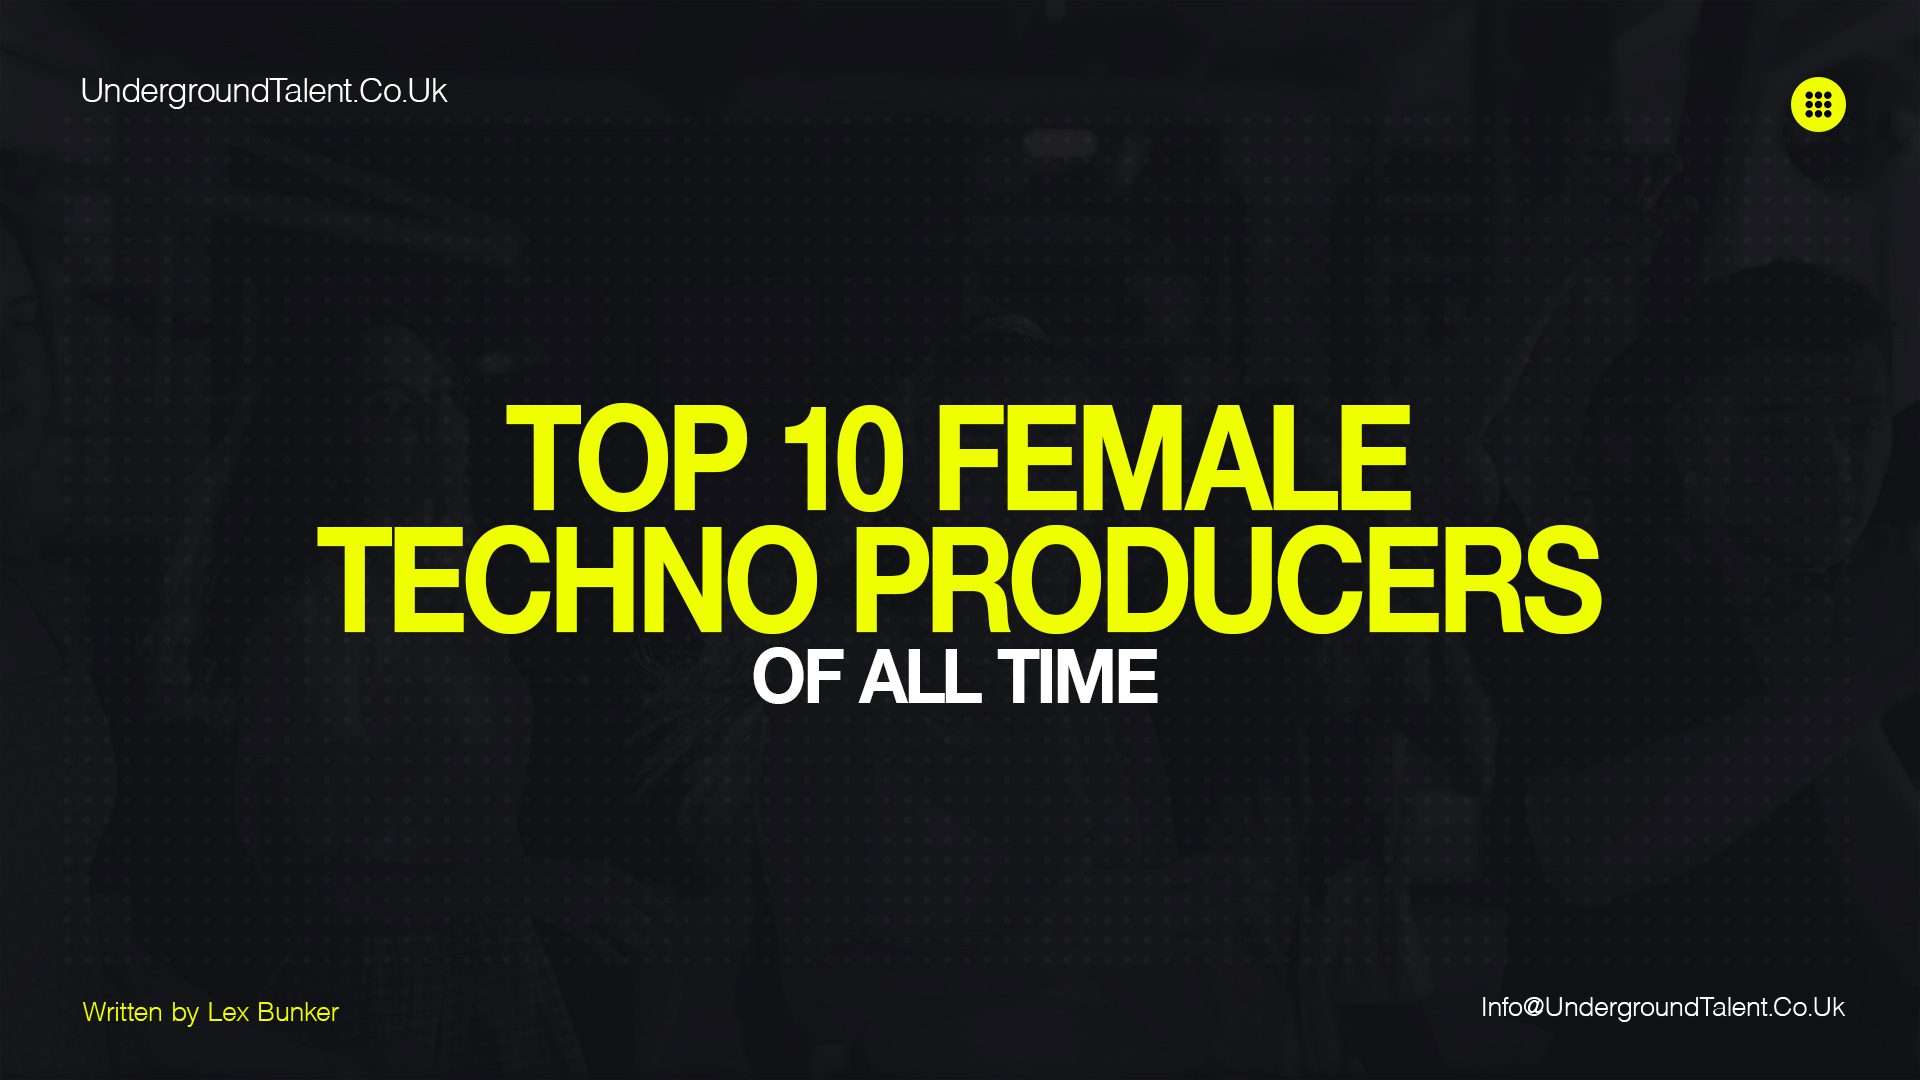 Top 10 Female Techno Producers of All Time